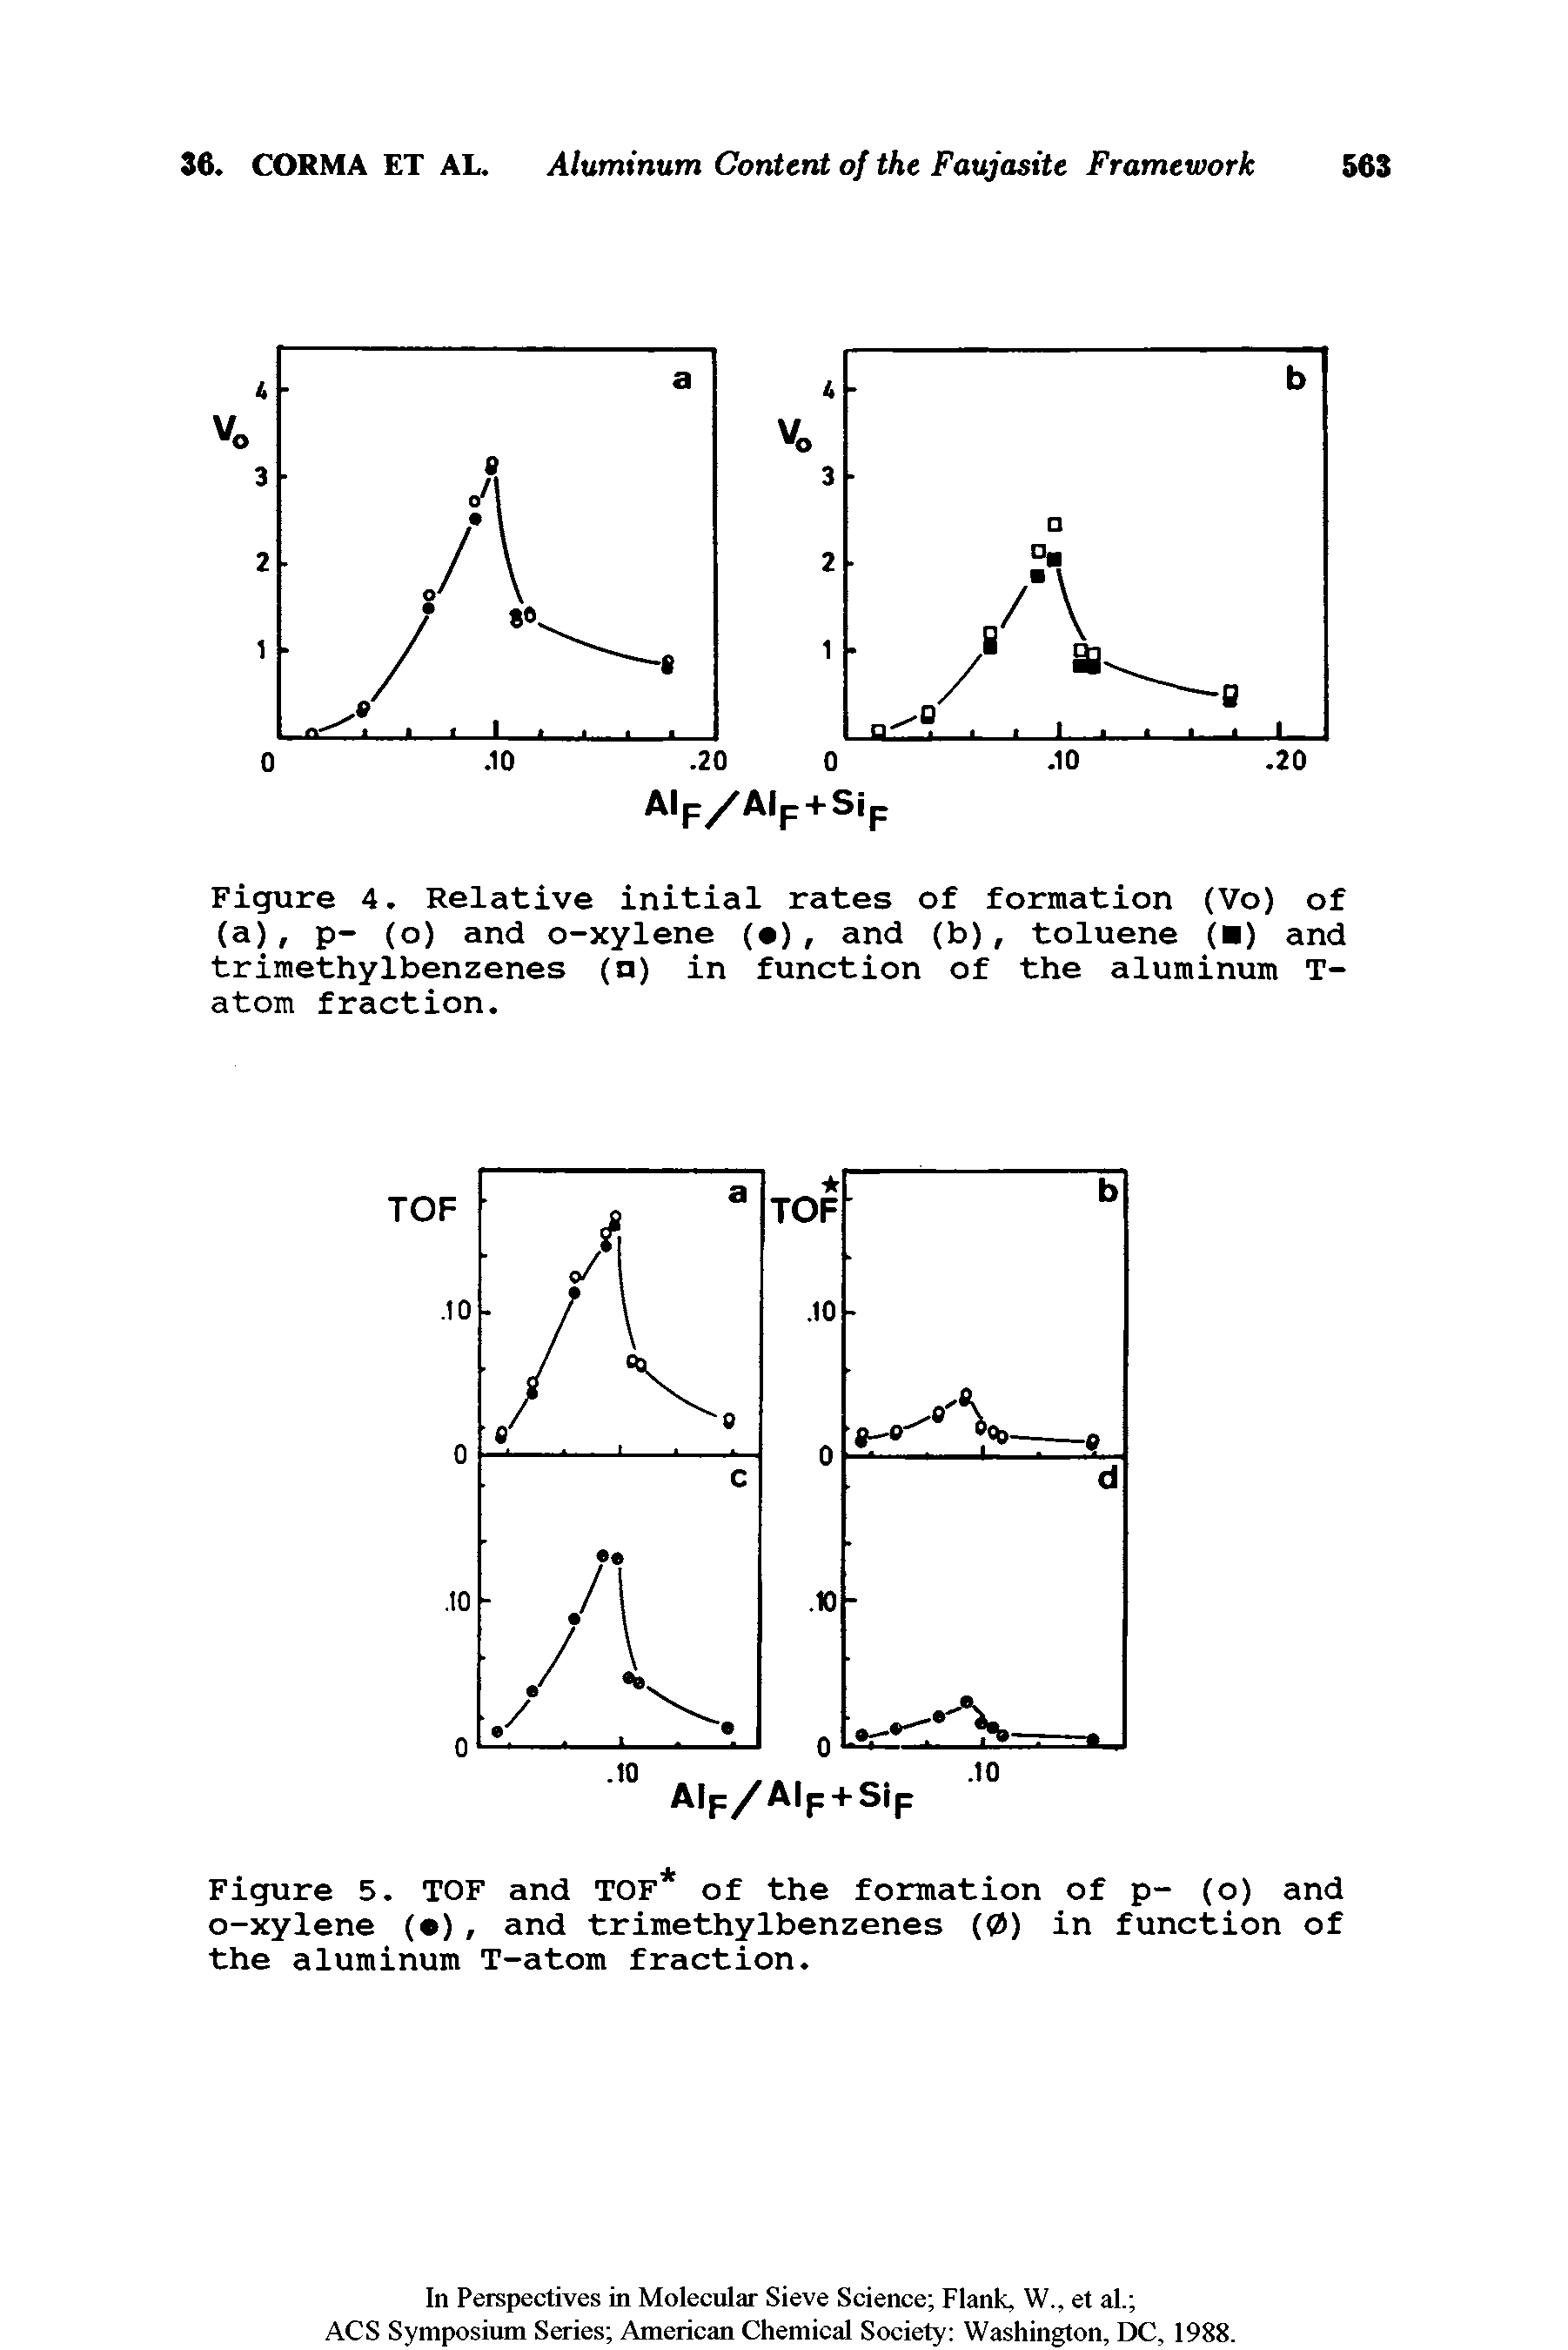 Figure 4. Relative initial rates of formation (Vo) of (a), p- (o) and o-xylene ( ), and (b), toluene ( ) and trimethylbenzenes (a) in function of the aluminum T-atom fraction.